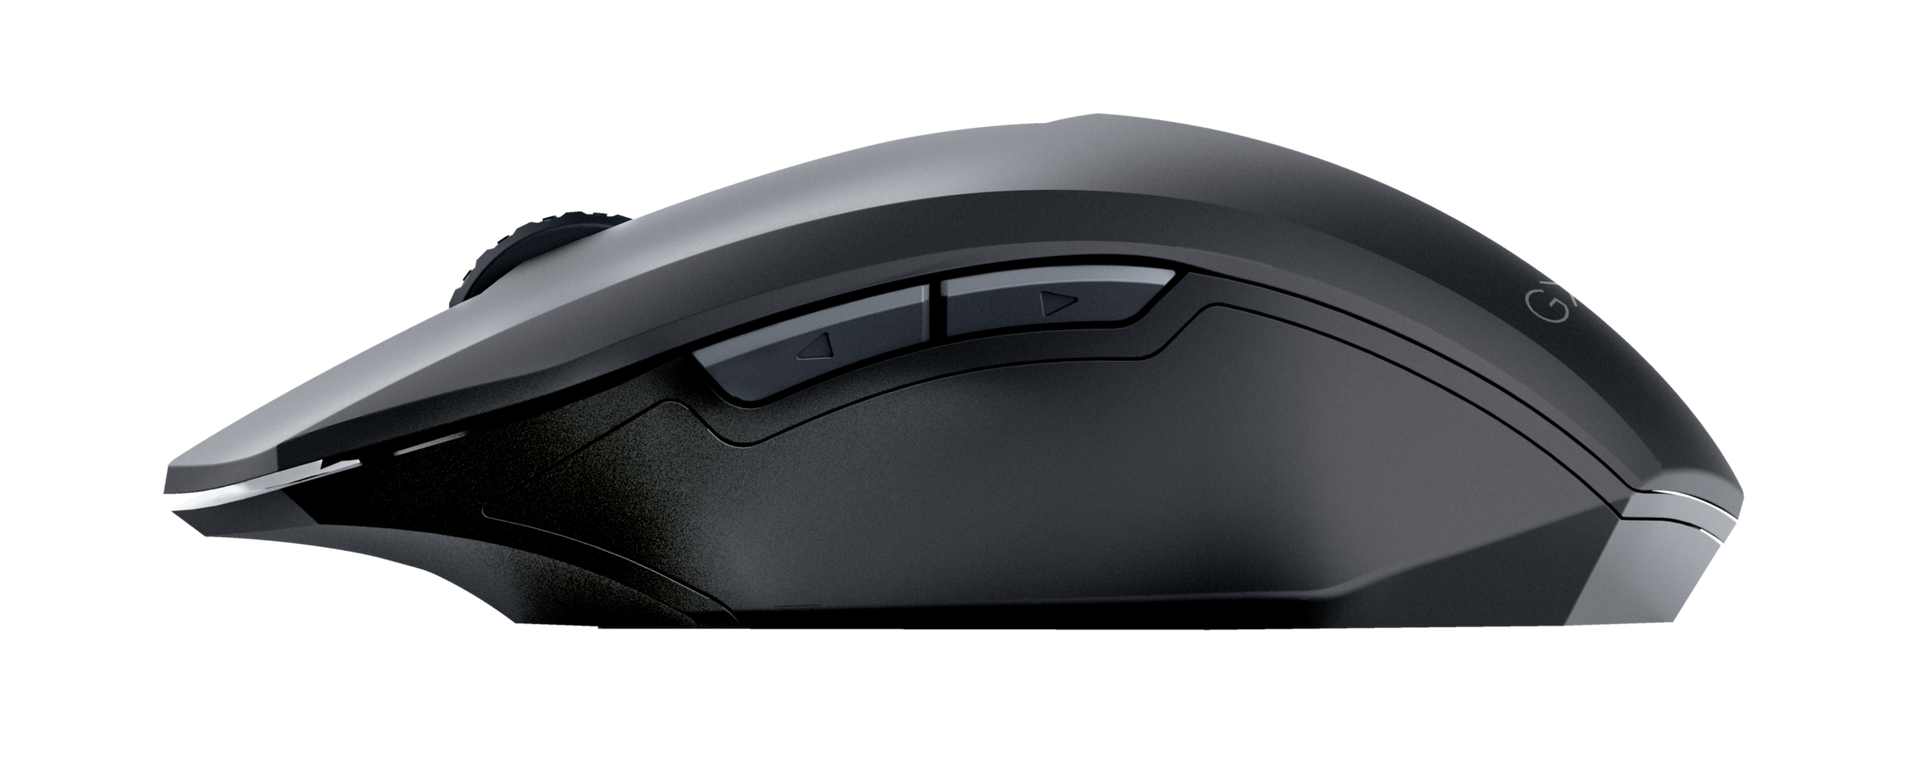 GXT 115 Macci Wireless Gaming Mouse-Side